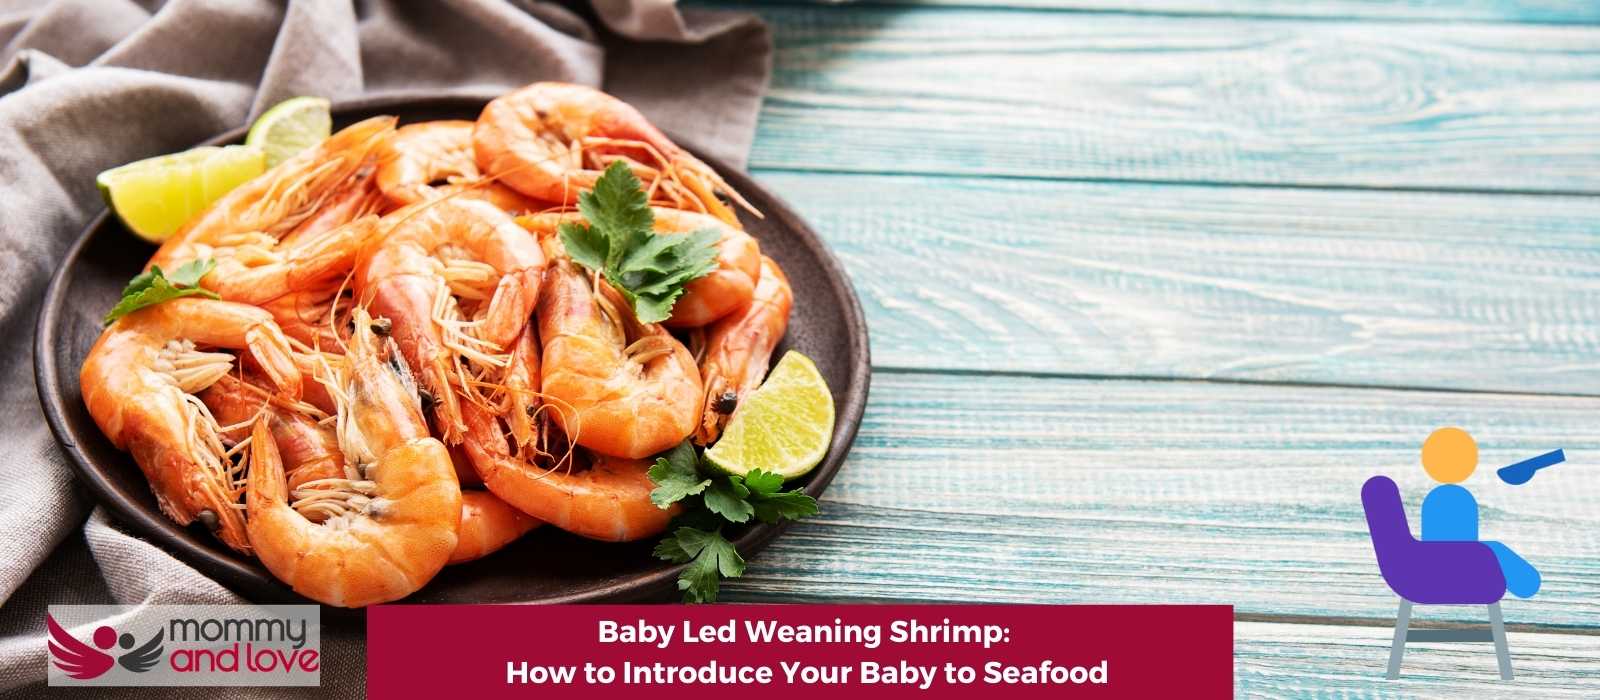 Baby Led Weaning Shrimp: How to Introduce Your Baby to Seafood